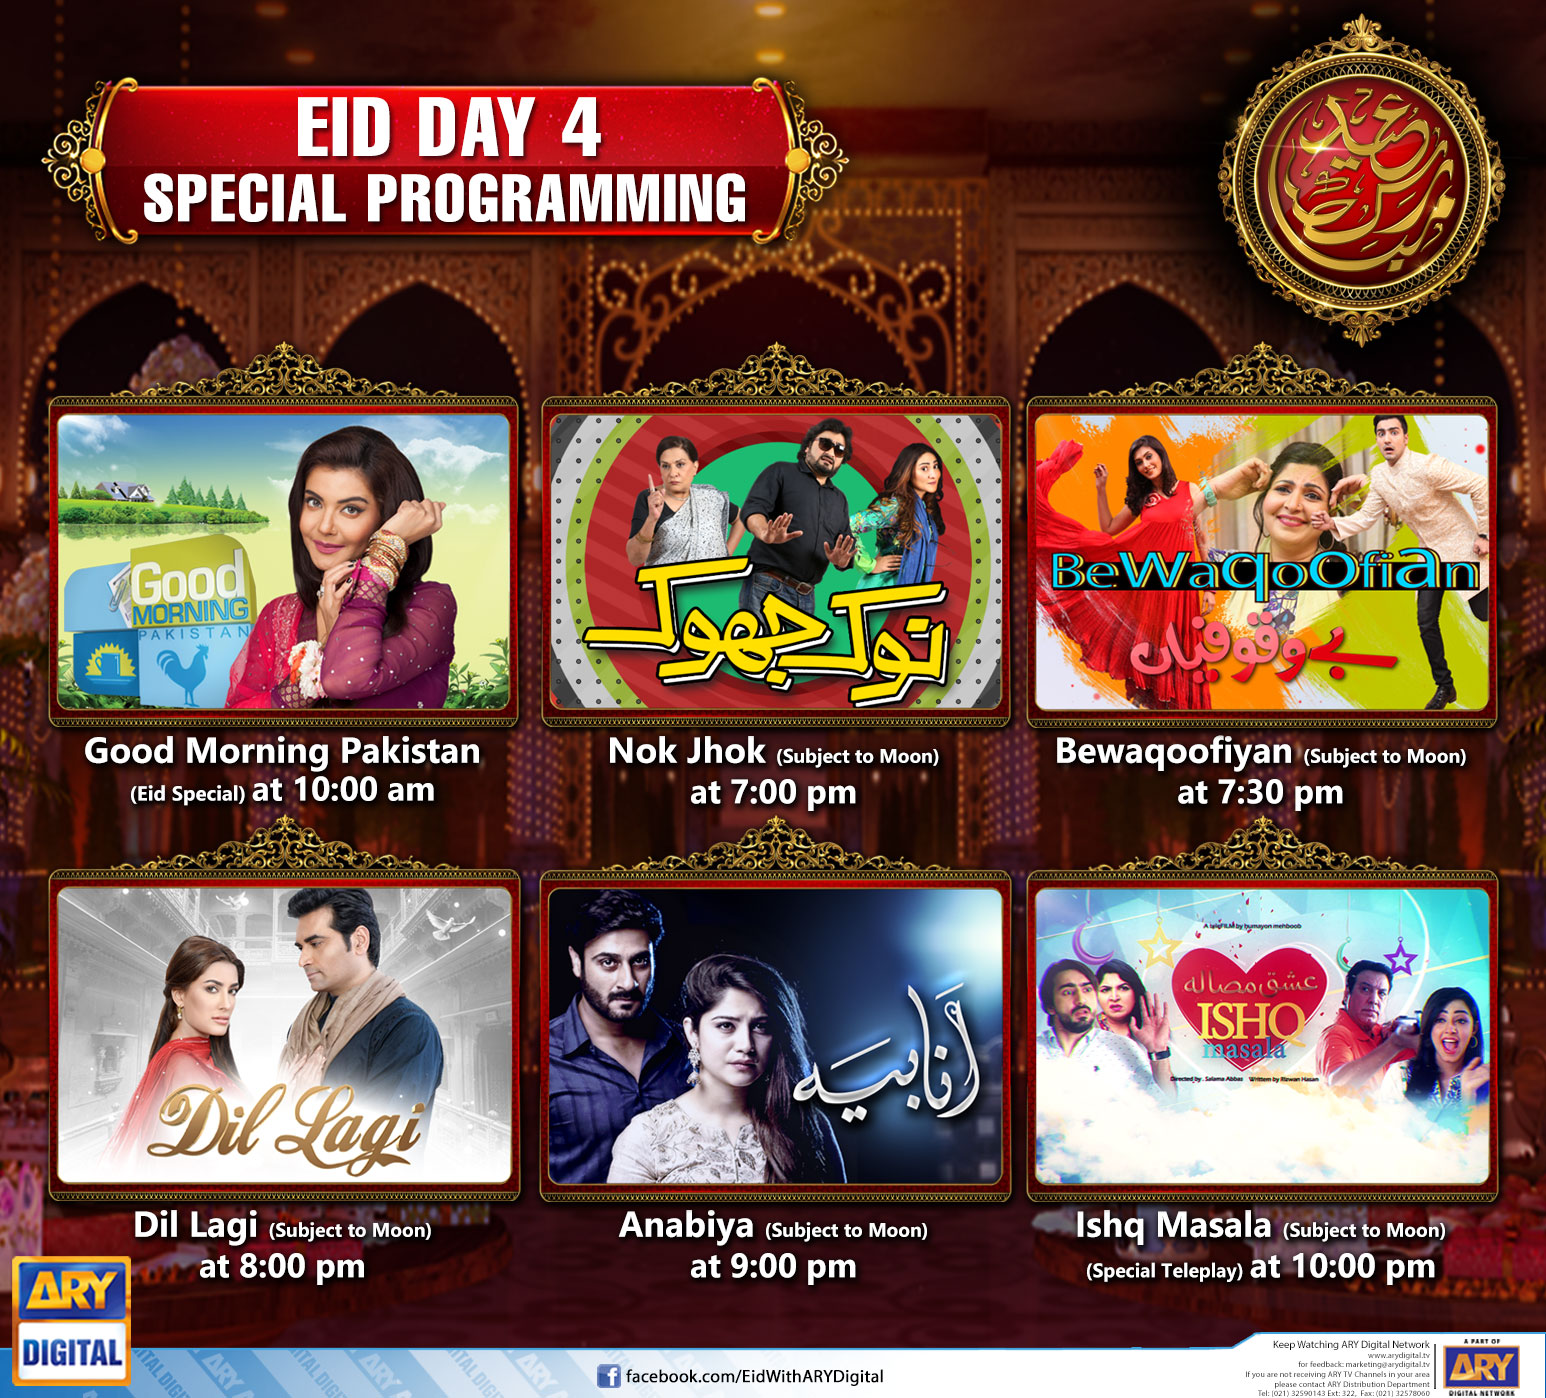 [Press Release] ARY Digital and ARY Zindagi brings exciting programs for Eid 2016 (4)